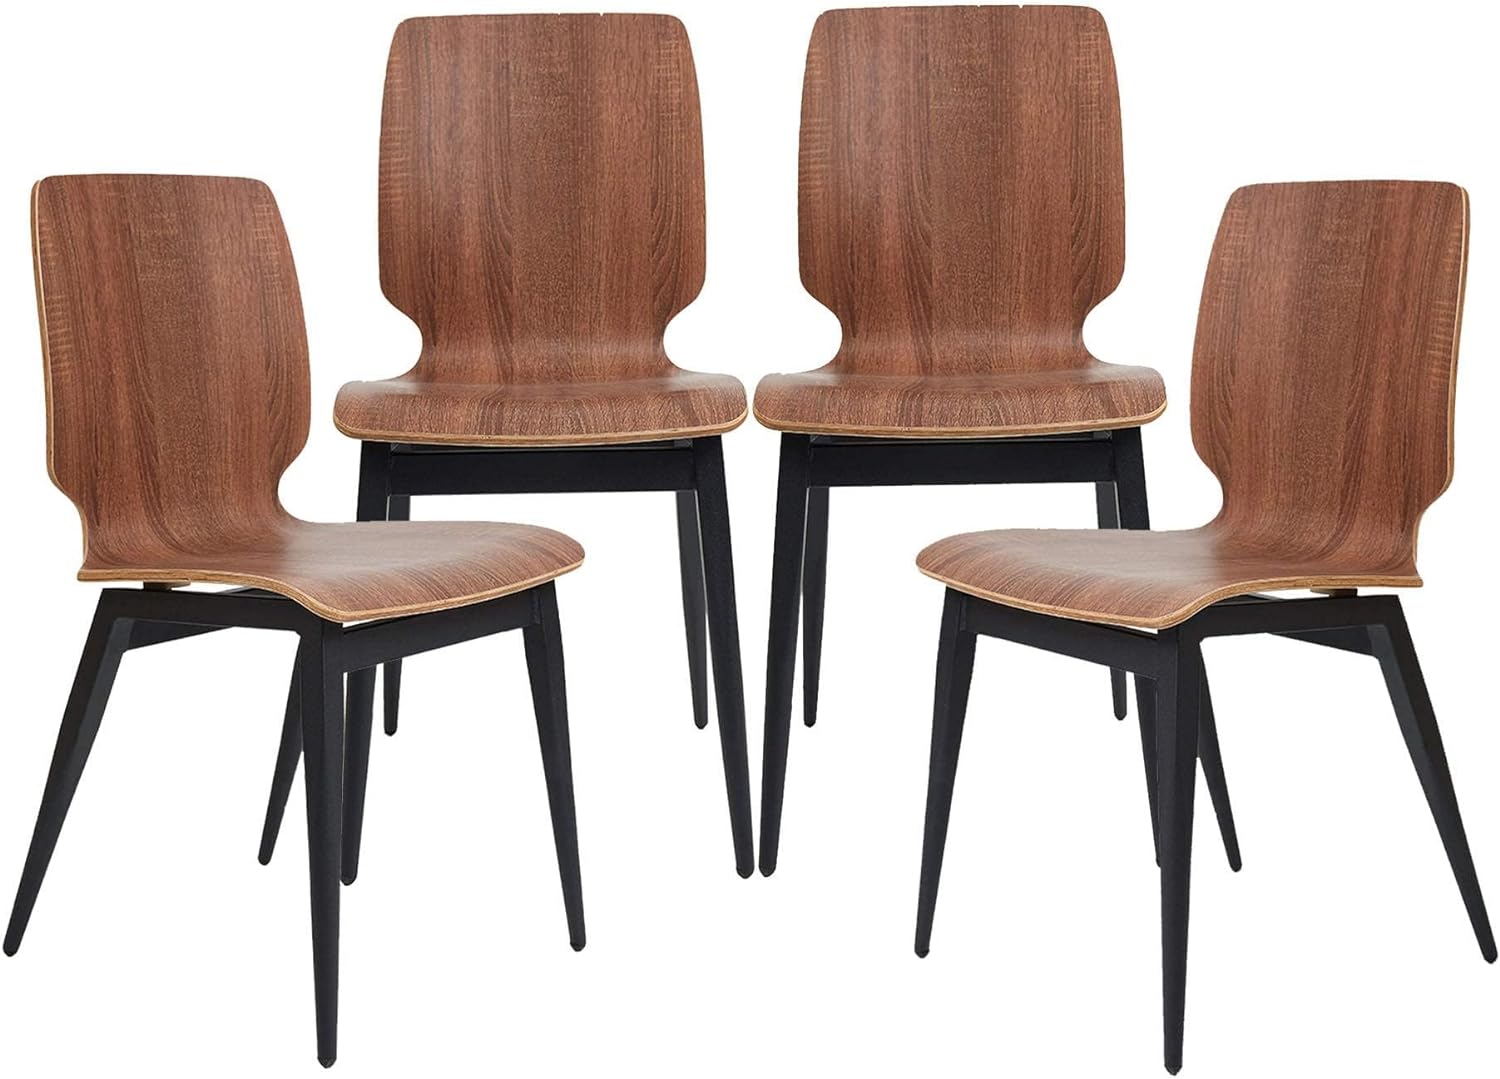 LUCKYERMORE Set of 4 Modern Kitchen Chairs with Wooden Seats Metal Legs Dining Side Chair, Brown Curved Edge